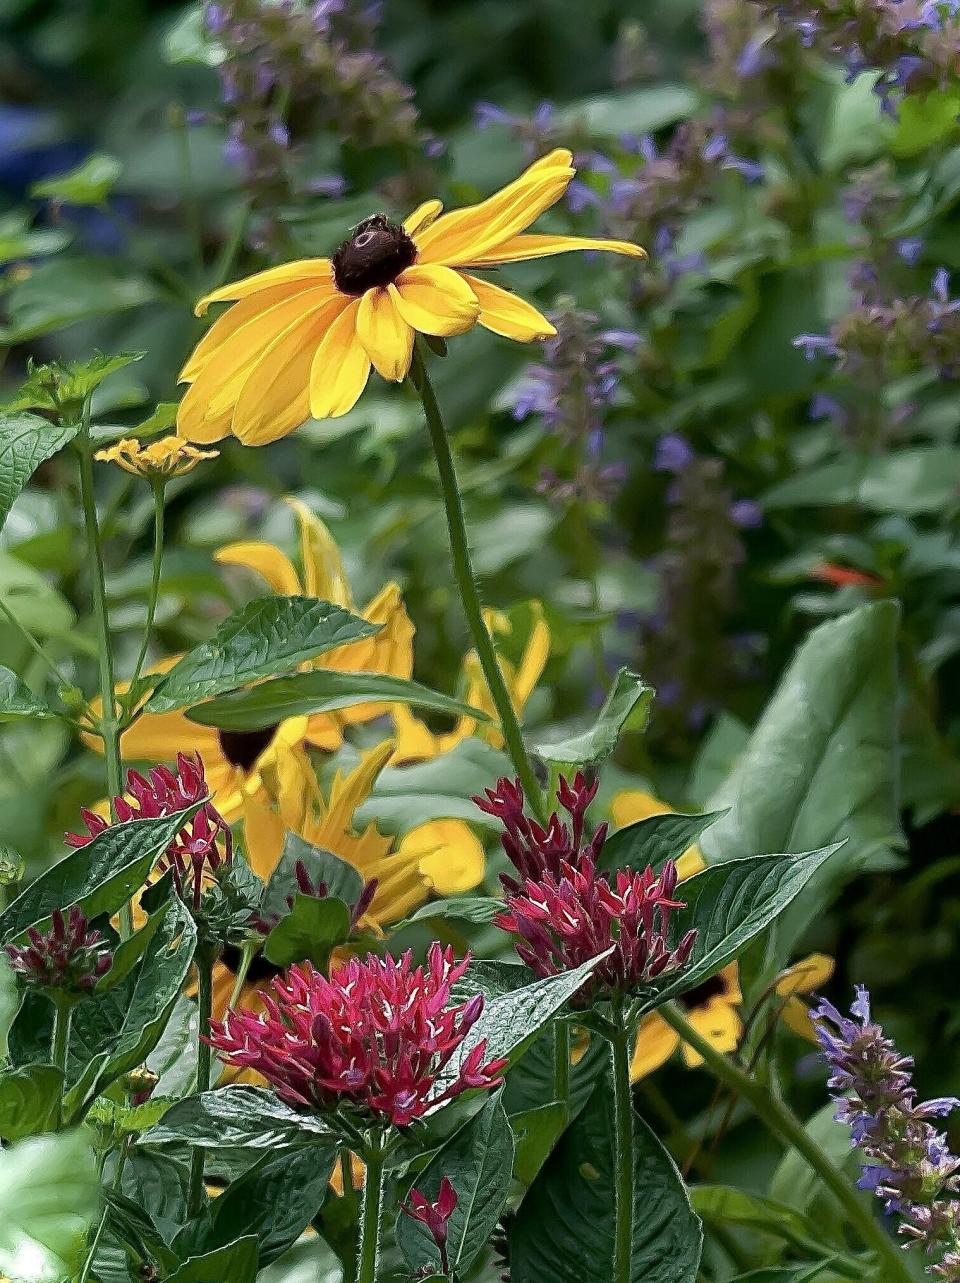 Sunstar Lavender pentas also make great partners with Color Coded coneflowers.